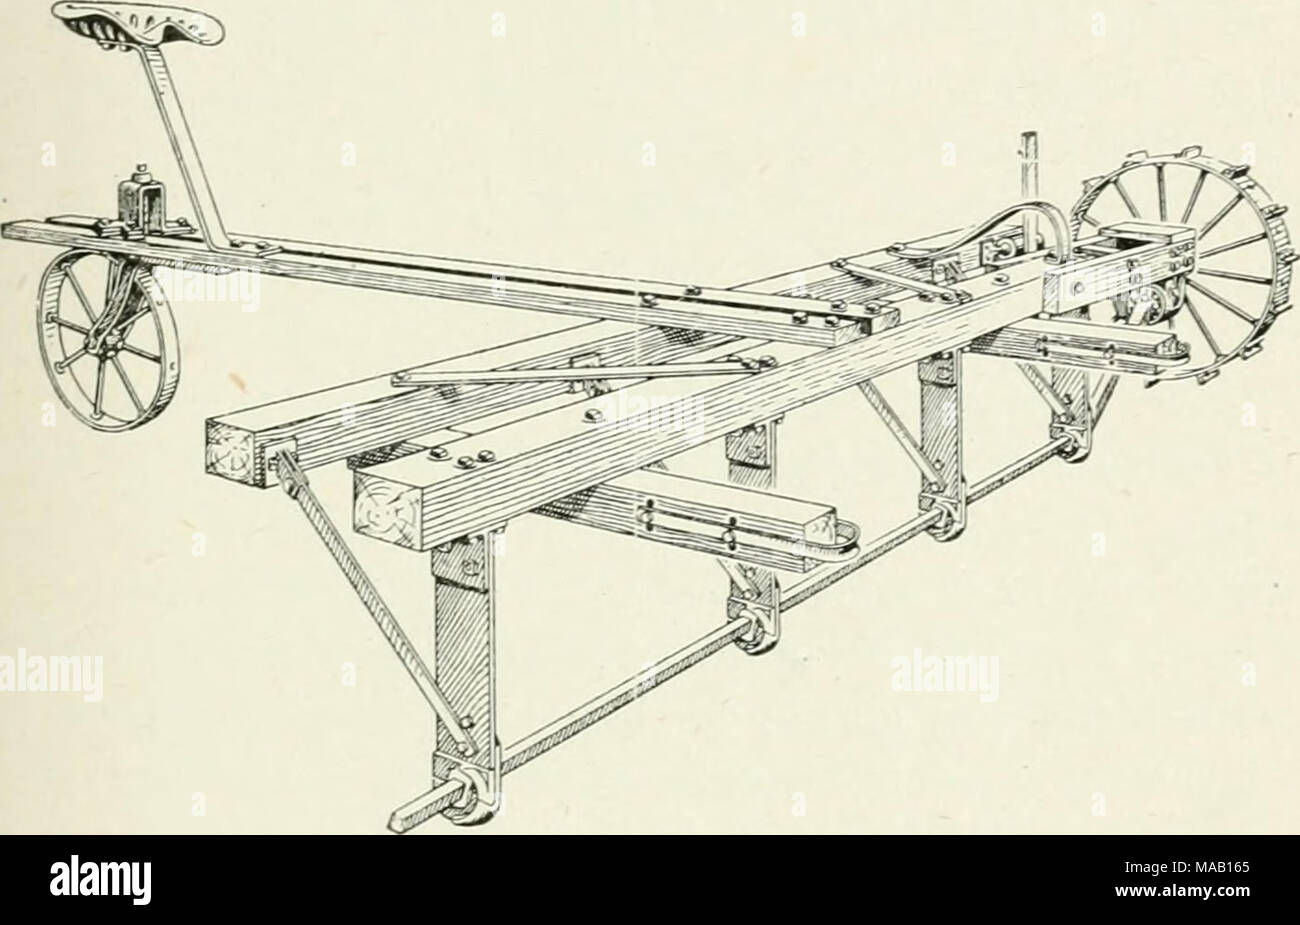 . Dry farming in western Canada . Fig. 93.—Rotary Rod Cultivator. A new machine that is being tried out on soils that are inclined to drift. used as a partial substitute for the fallow. Where fal- low land in such areas drifts badly, the use of corn as a substitute for fallowing lessens the tendency to drift, ruder severe conditions the corn ground will blow, but frequently the corn stubble furnishes sufficient protec- tion to wholly prevent serious injury from this cause. Where corn is grown and the field kept free from w Is, plowing is, as a rule, not necessary or even advisable for iIn- nex Stock Photo